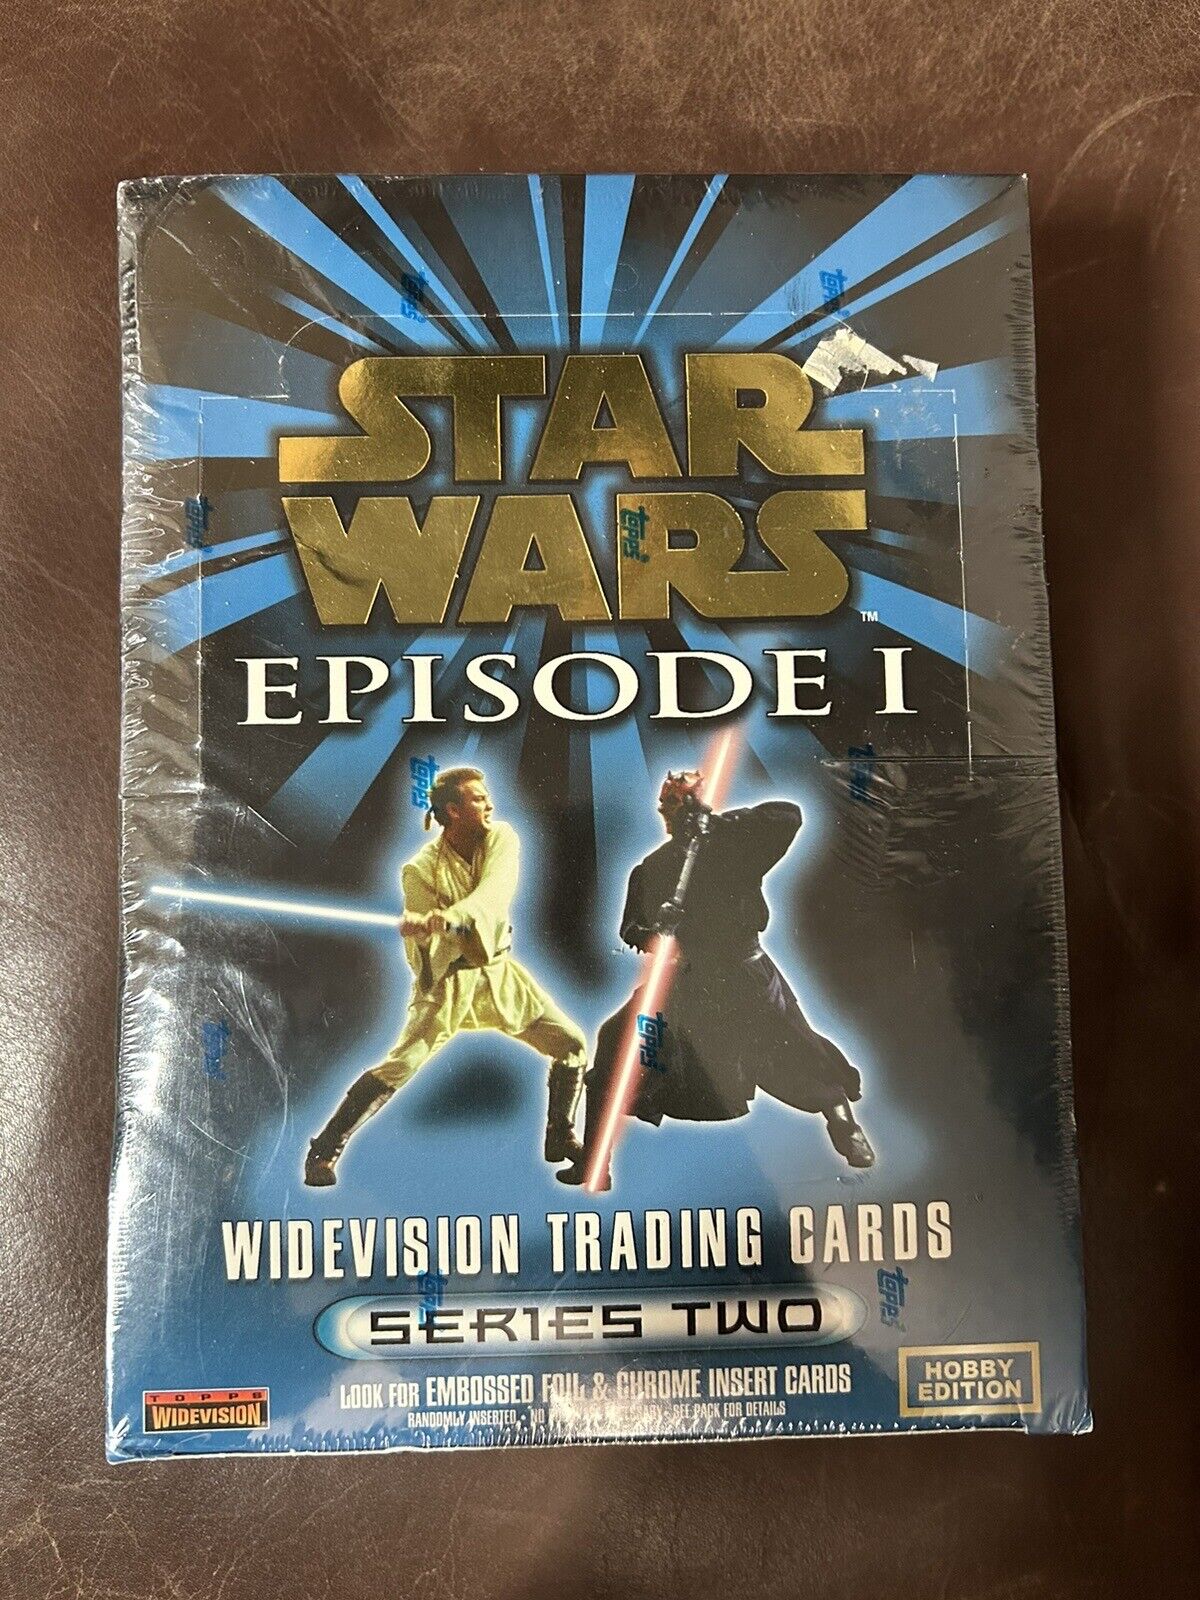 1999 TOPPS WIDEVISION STAR WARS EPISODE 1 SERIES 2 BOX HOBBY EDITION NEW SEALED